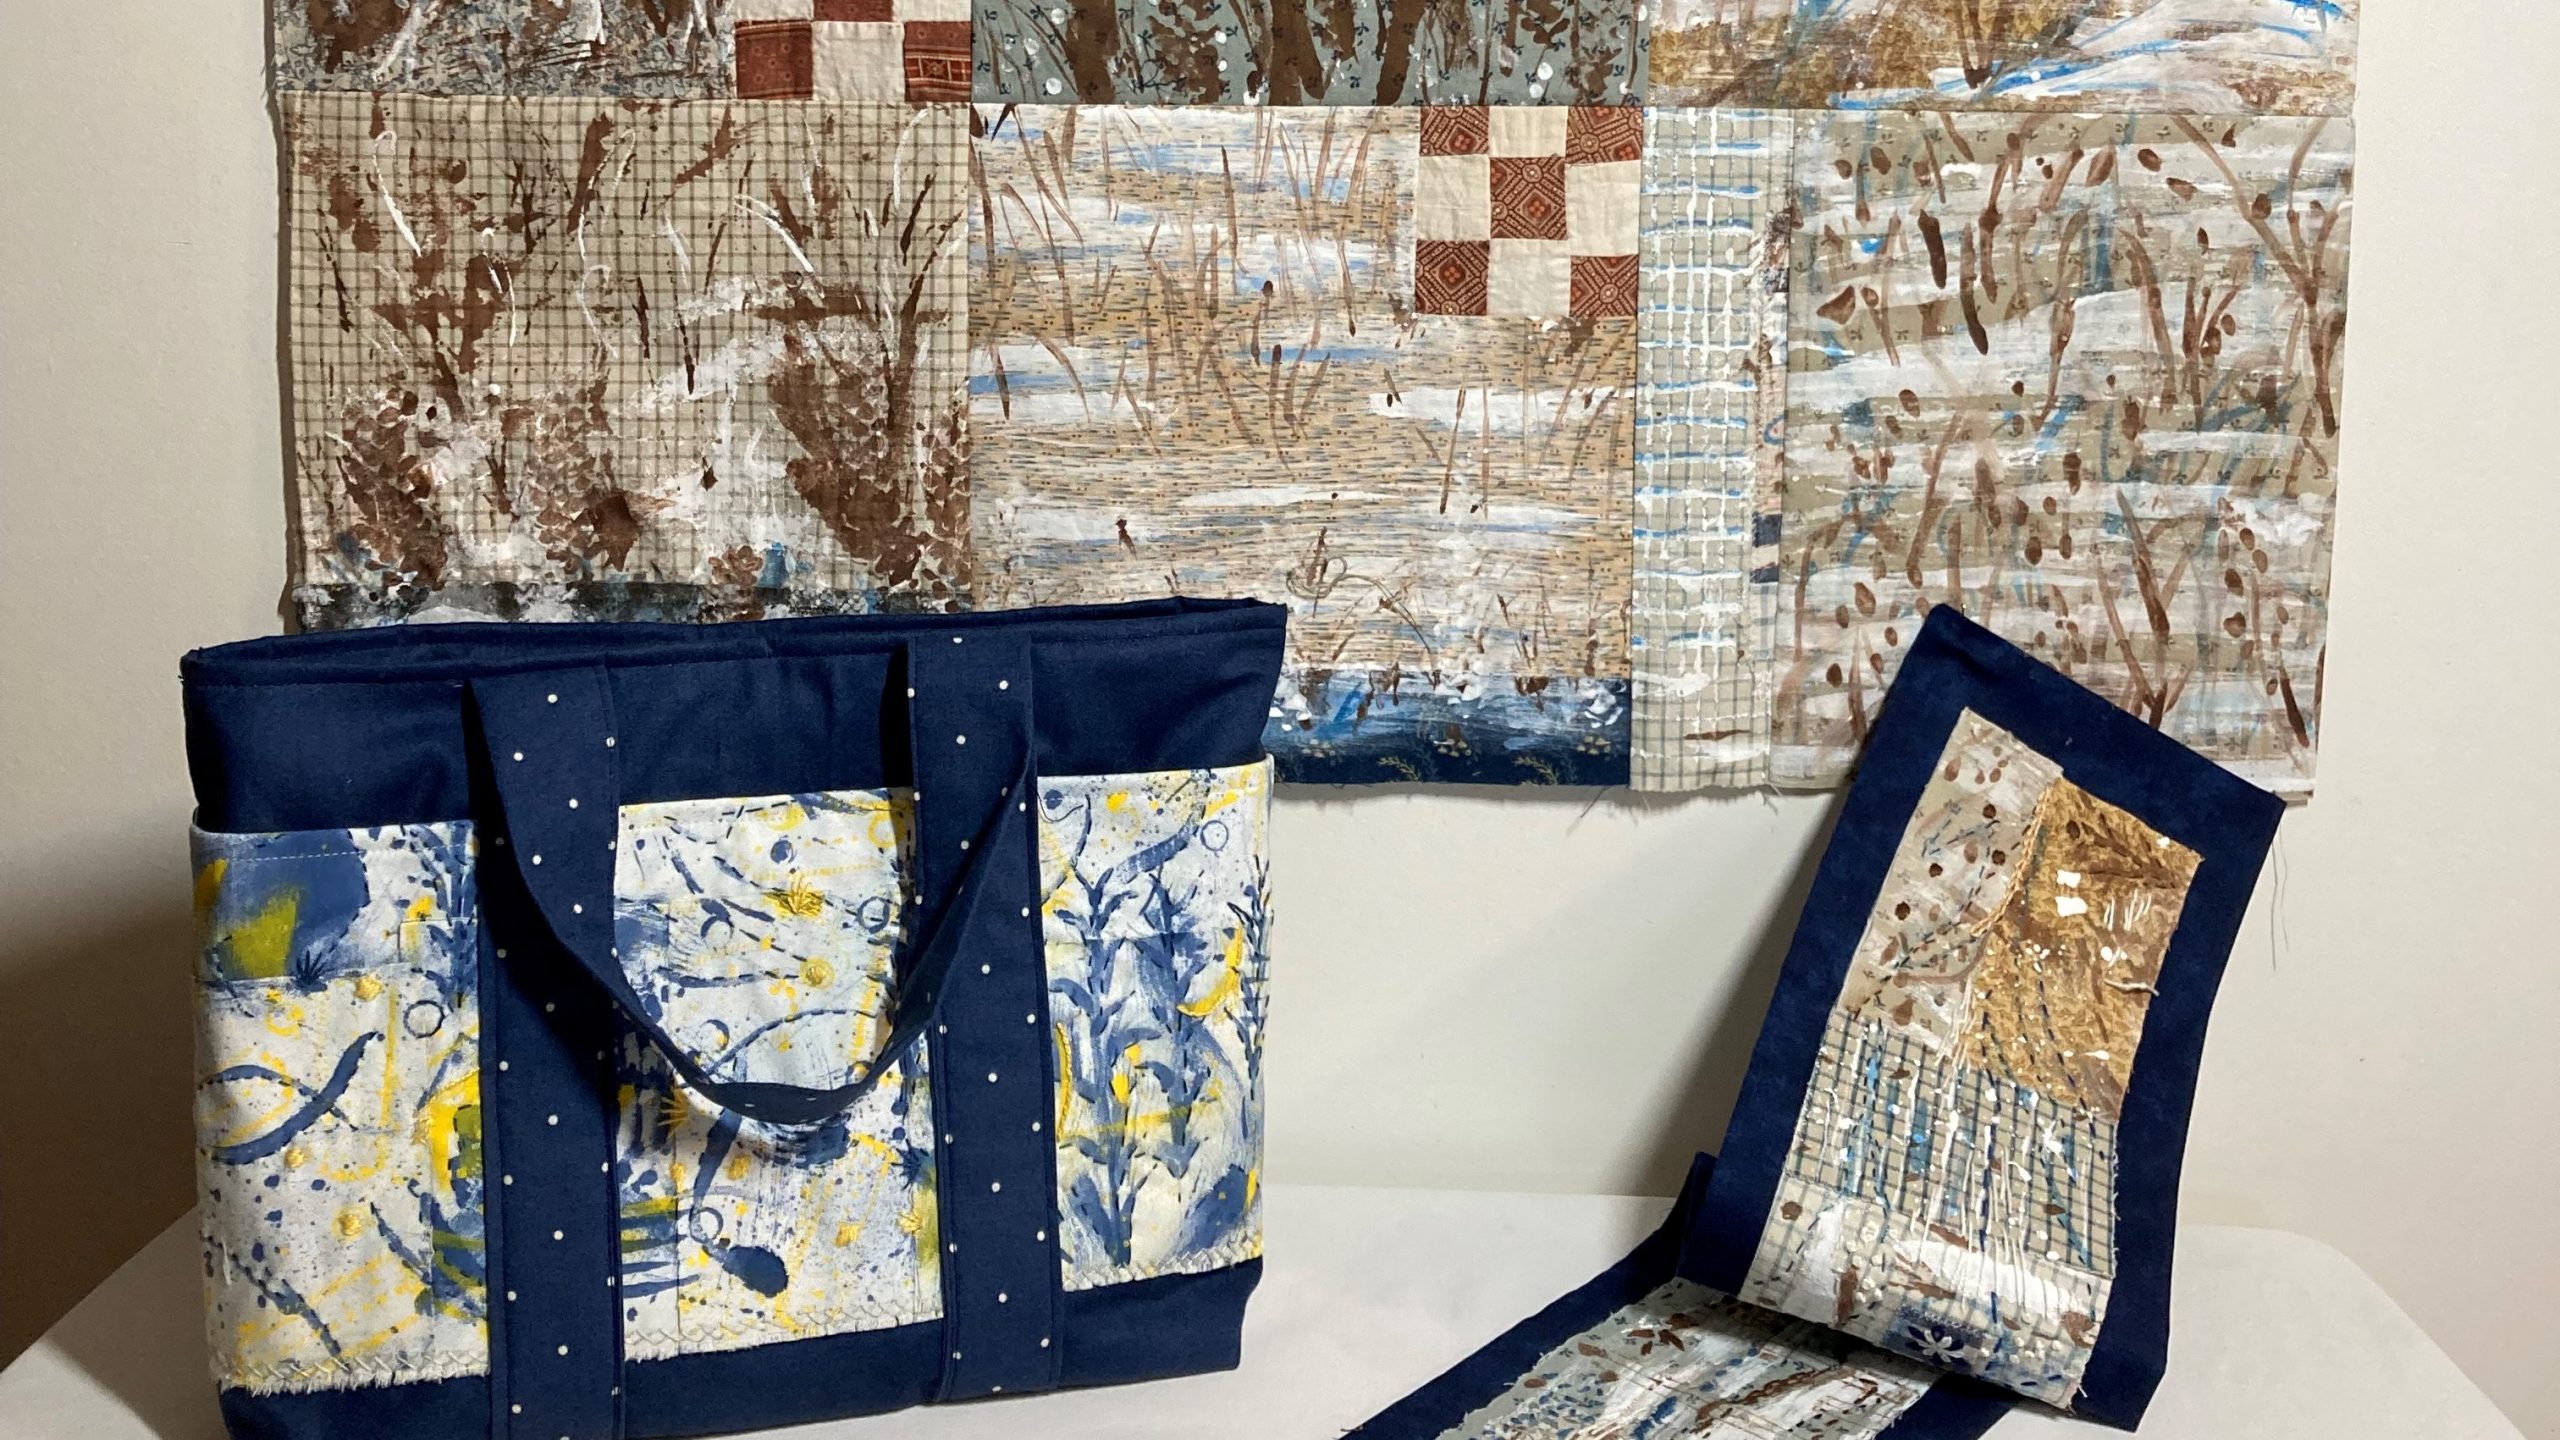 An image of mixed media cloth based objects.